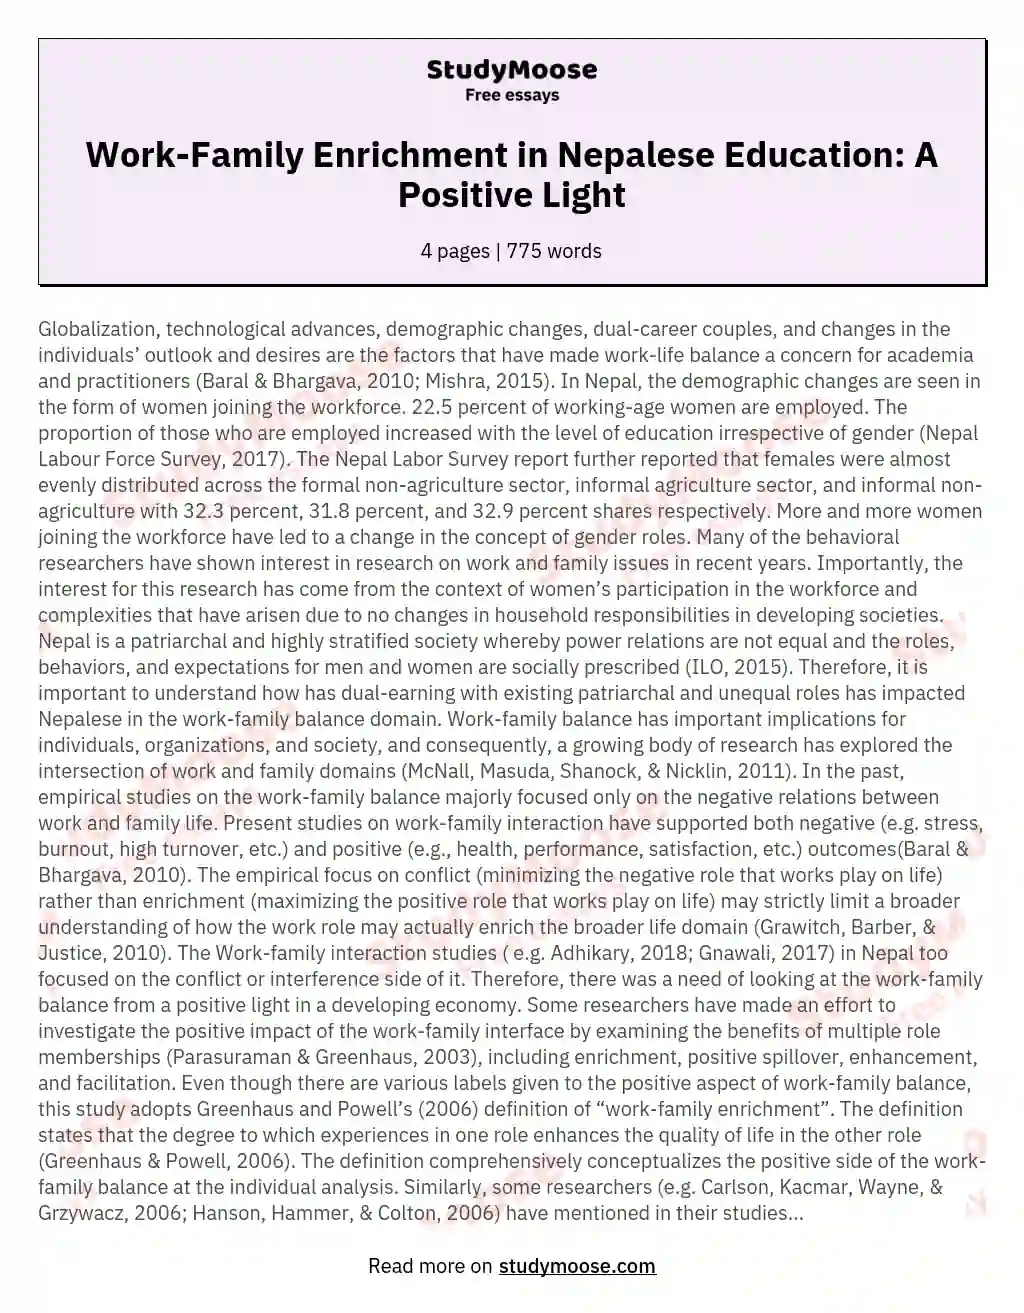 Work-Family Enrichment in Nepalese Education: A Positive Light essay